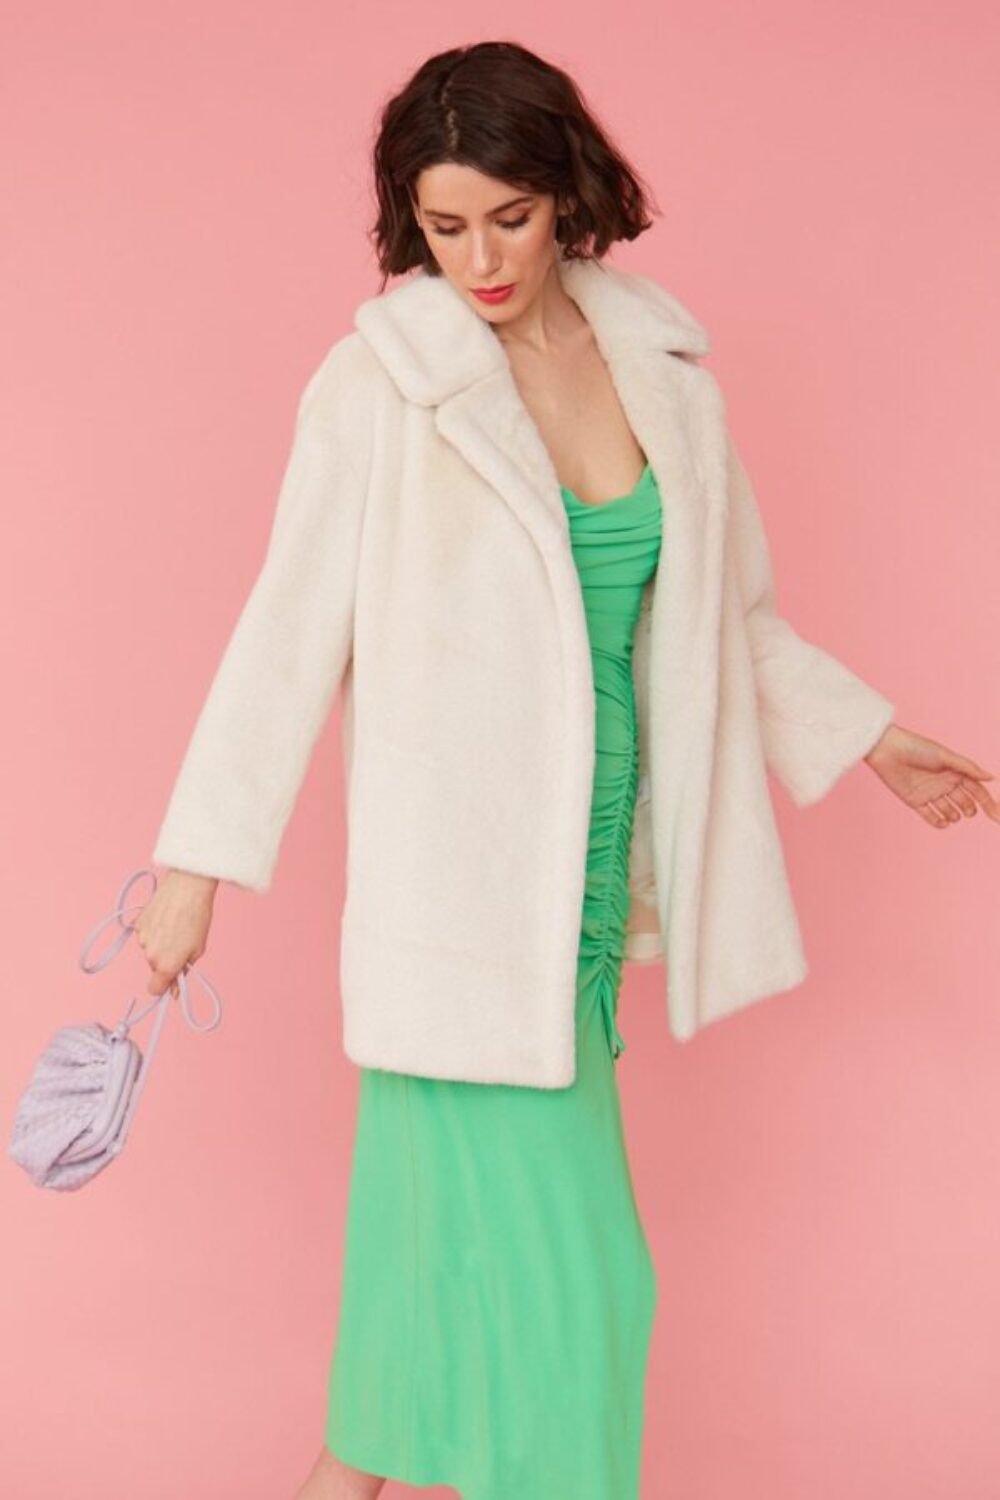 Shop Lux White Faux Fur Duchess Midi Coat and women's luxury and designer clothes at www.lux-apparel.co.uk